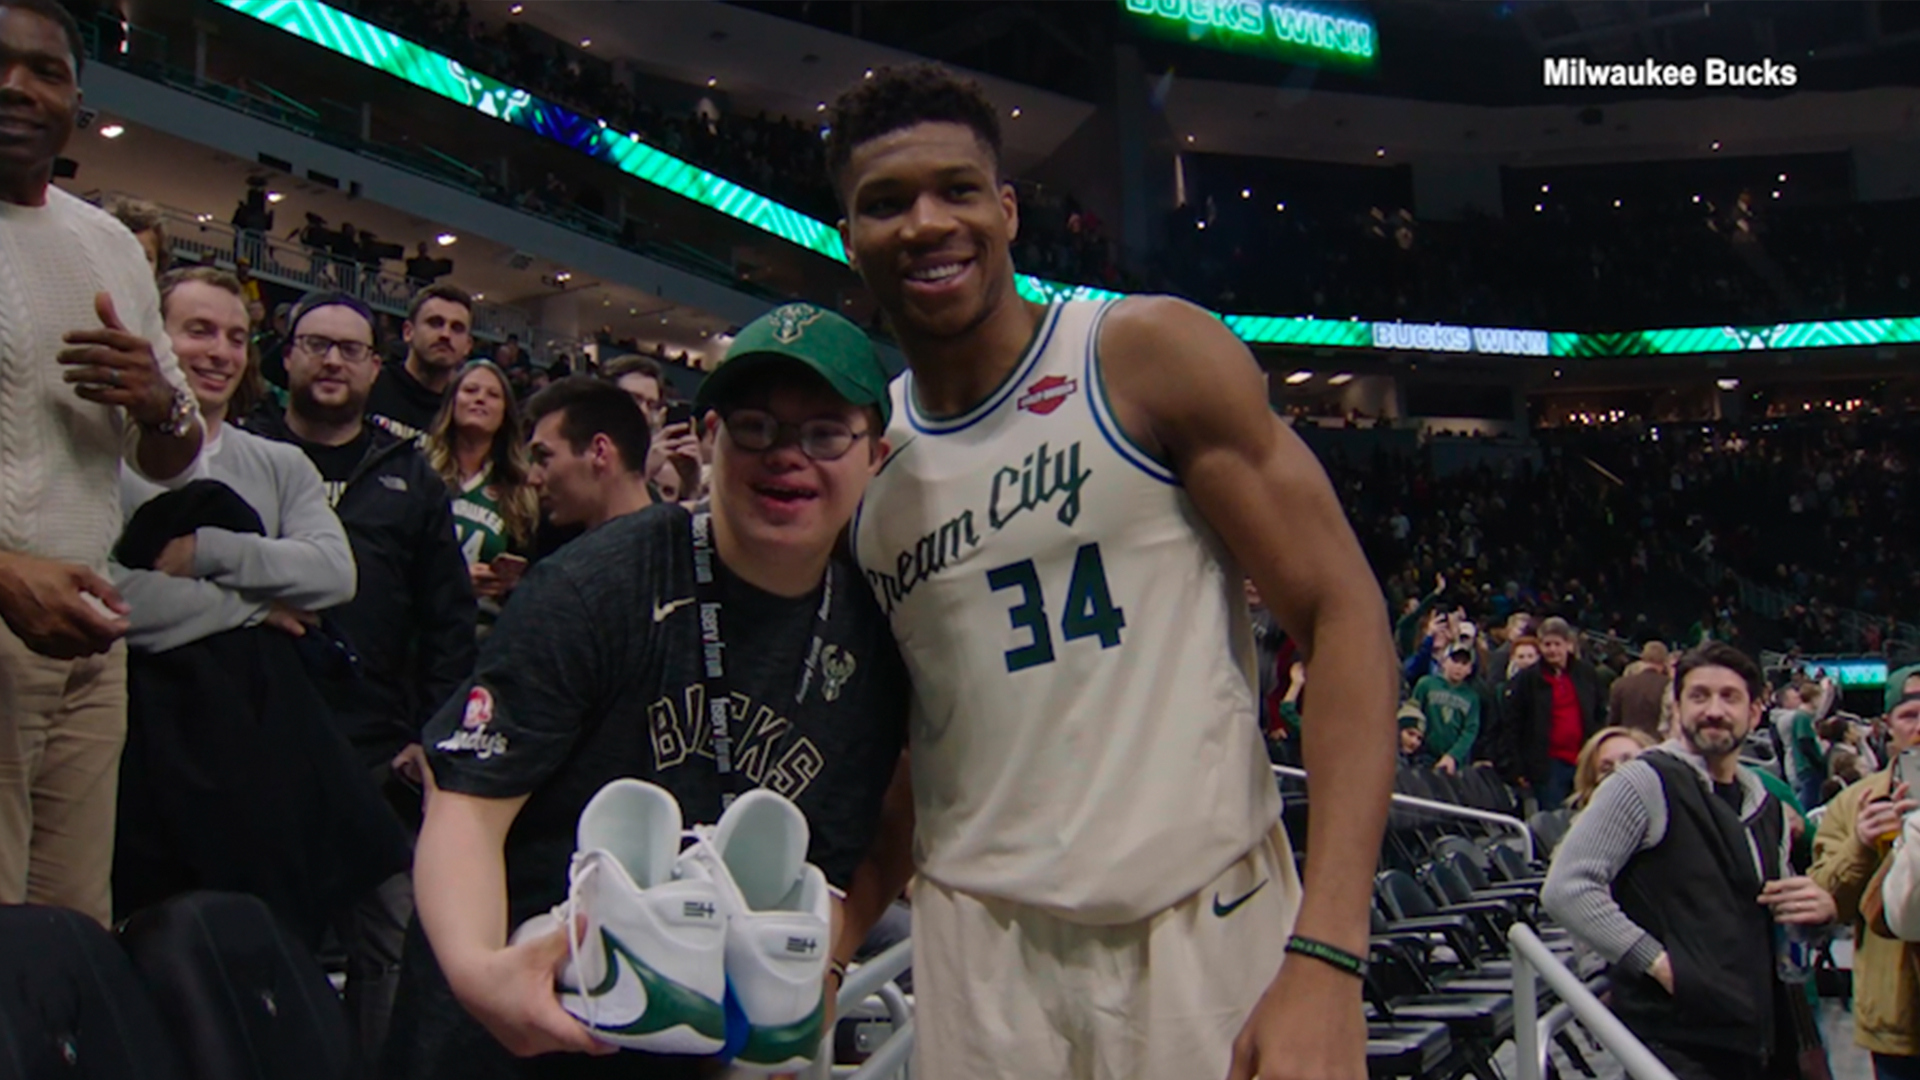 Watch The Uplift Man with Down syndrome gets NBA ring